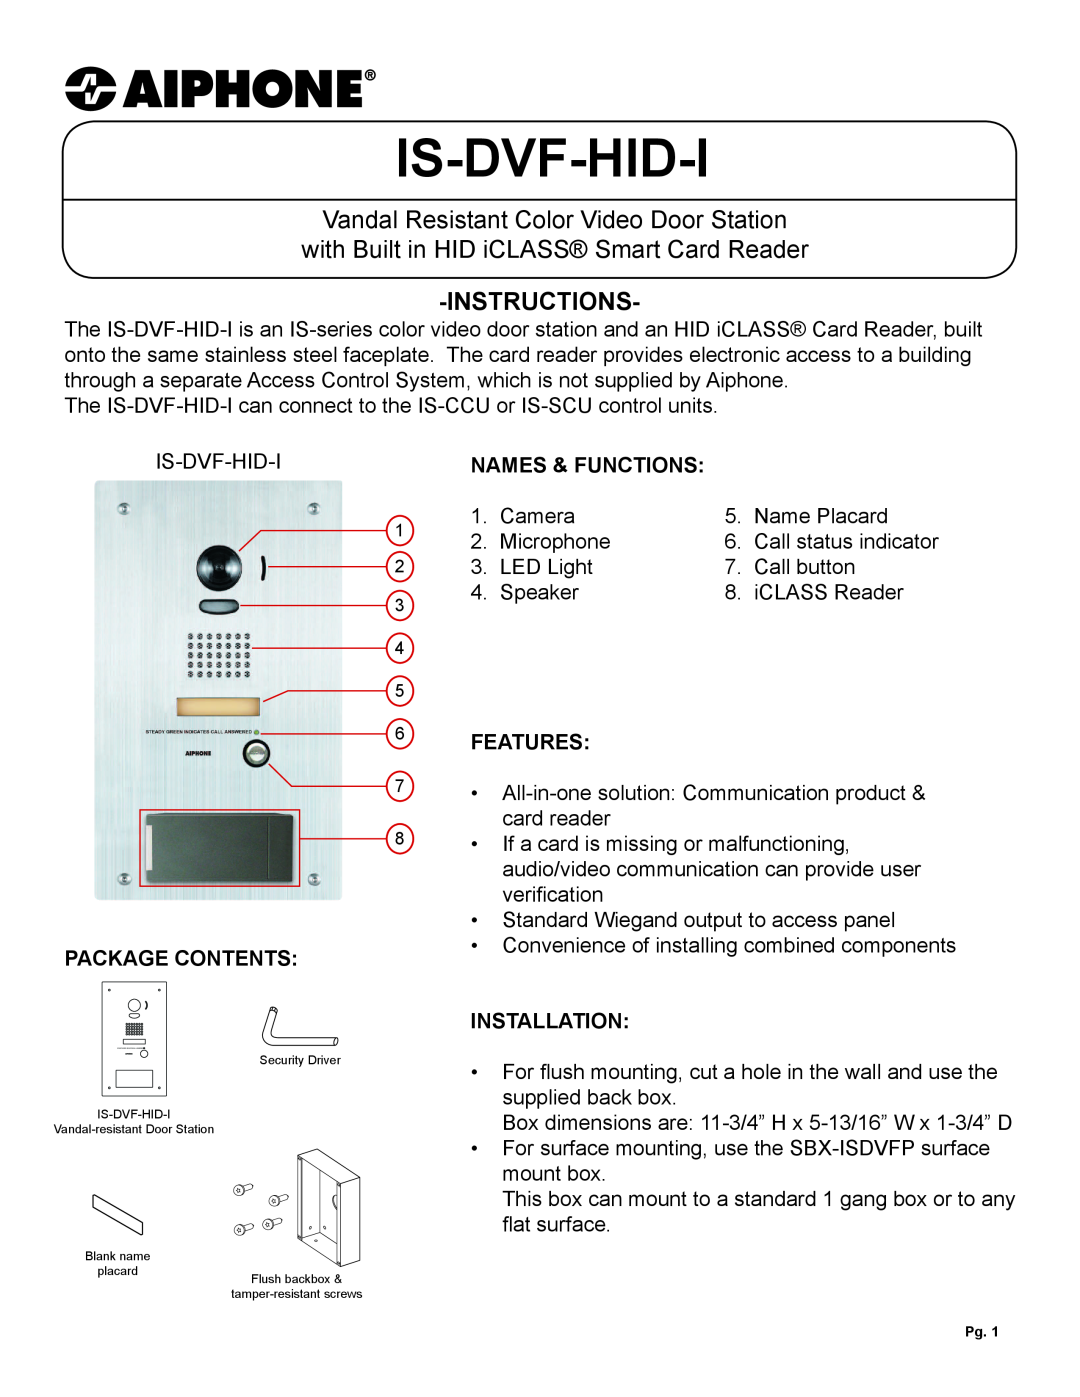 Aiphone IS-DVF-HID-I dimensions Package Contents, Names & Functions, Features, Installation, Is-Dvf-Hid-I, Instructions 